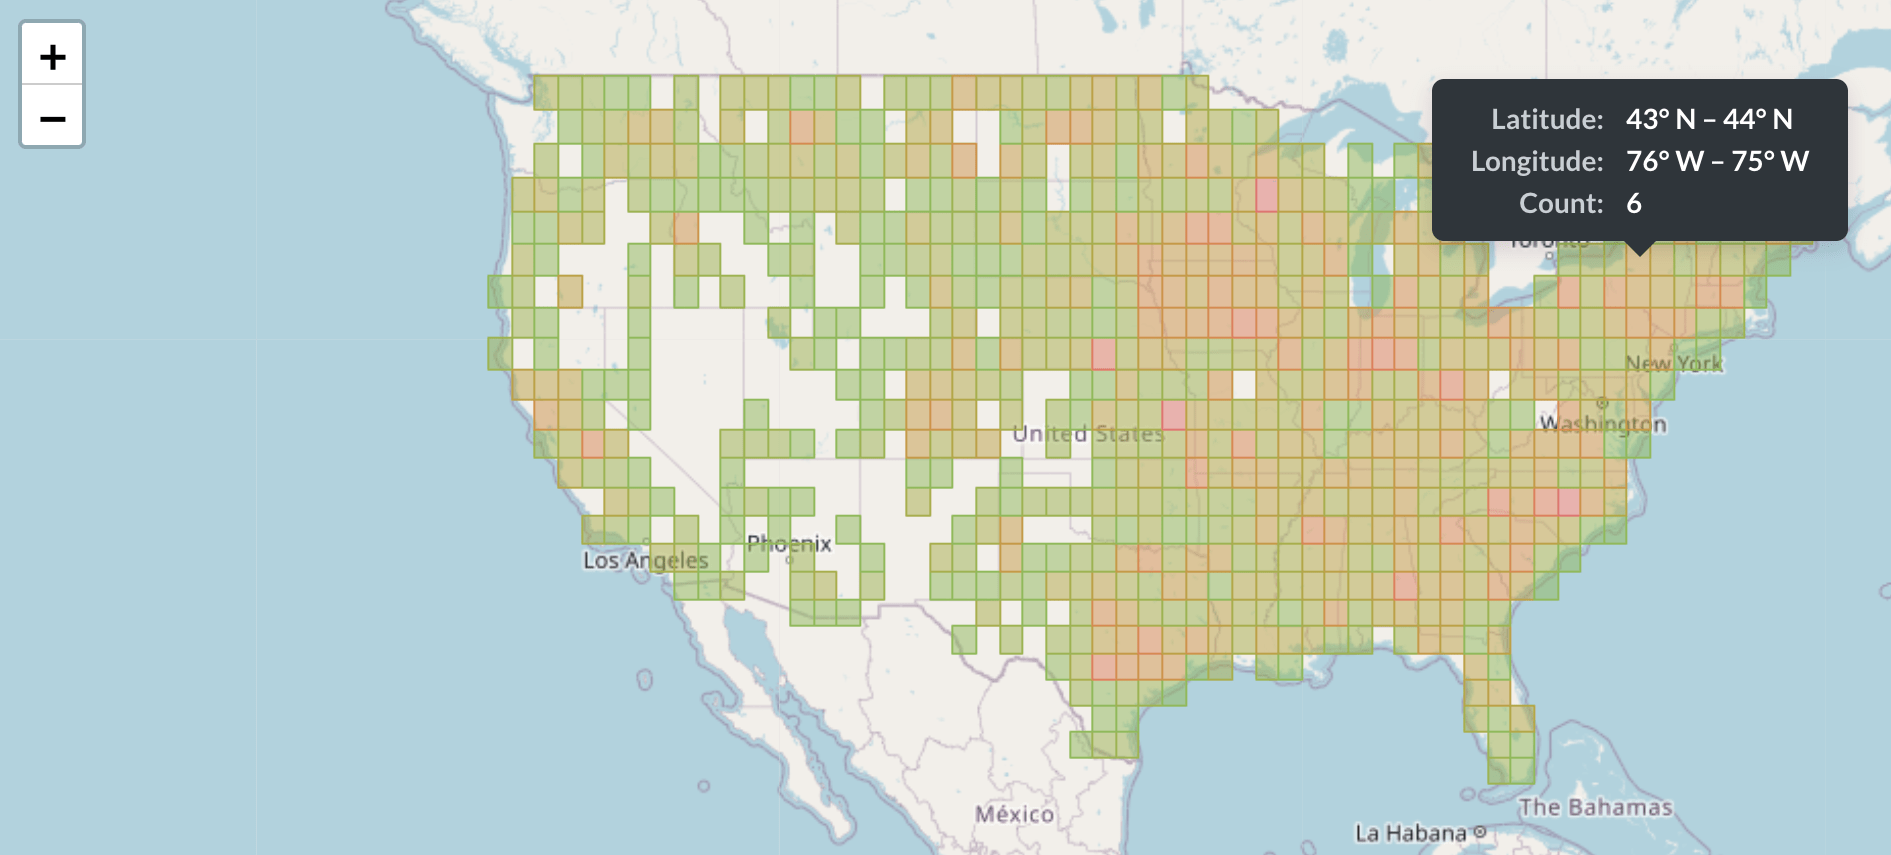 Map of USA exemplifying a grid map with a bin size of 1 degree. The red areas indicate a greater concentration of data points.